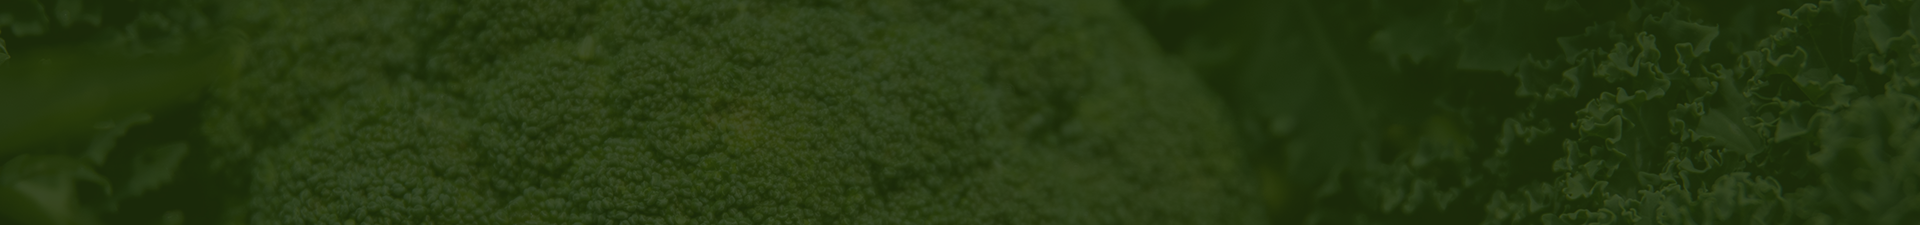 be broccoli banner